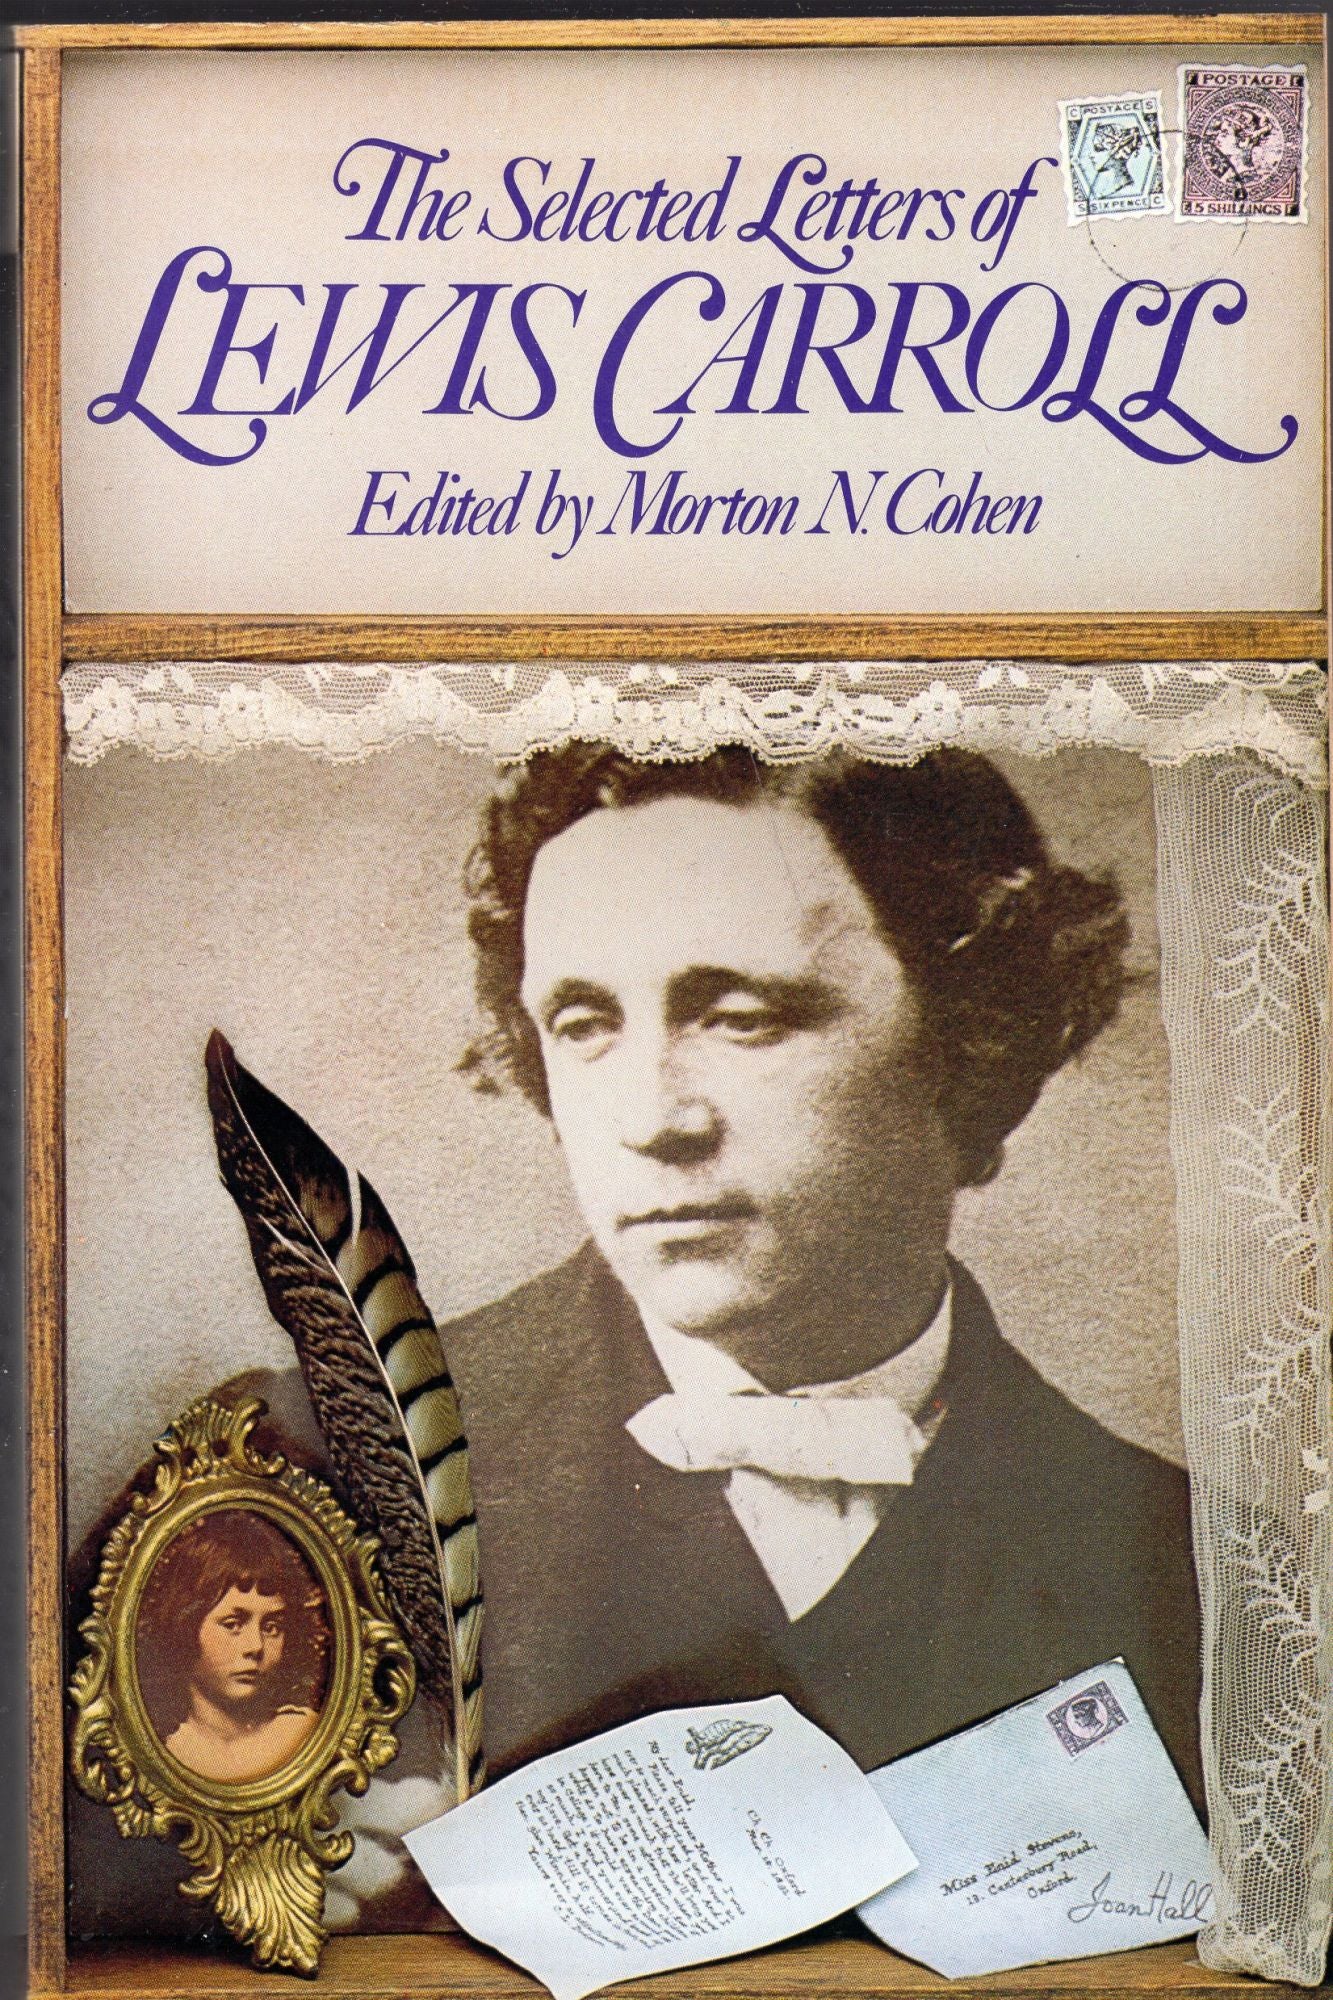 The Selected Letters of Lewis Carroll, LEWIS CARROLL